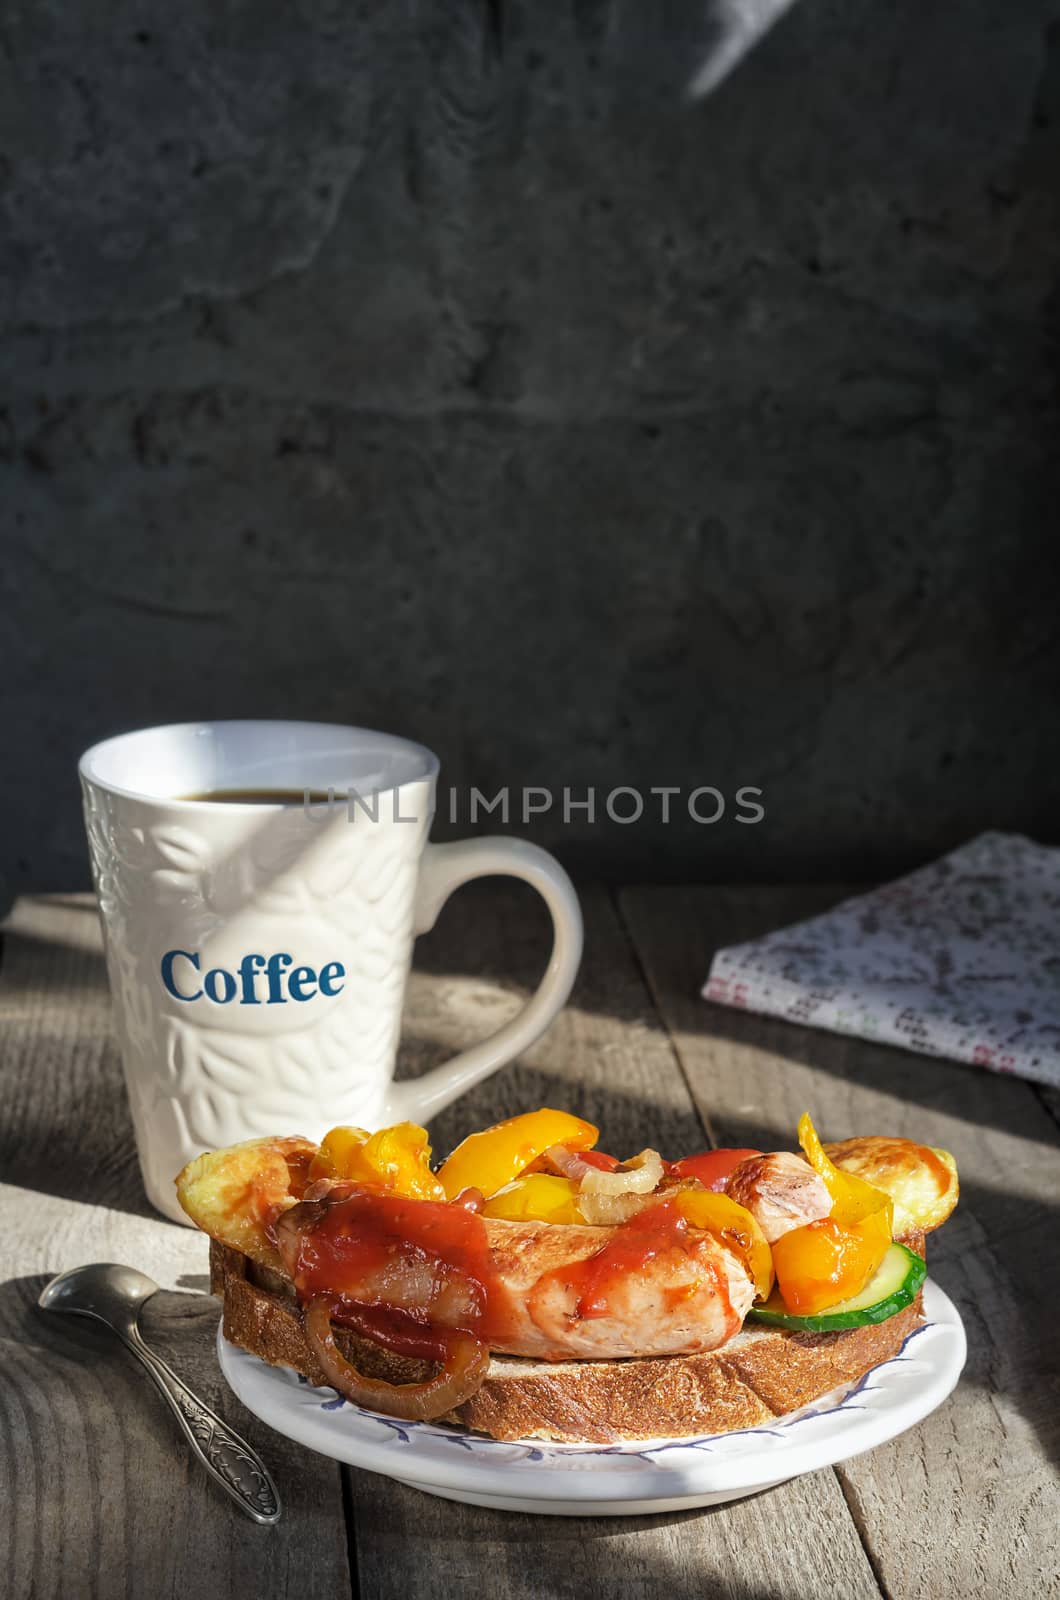 Sandwich with grilled sausages on a plate and coffee mug by Gaina